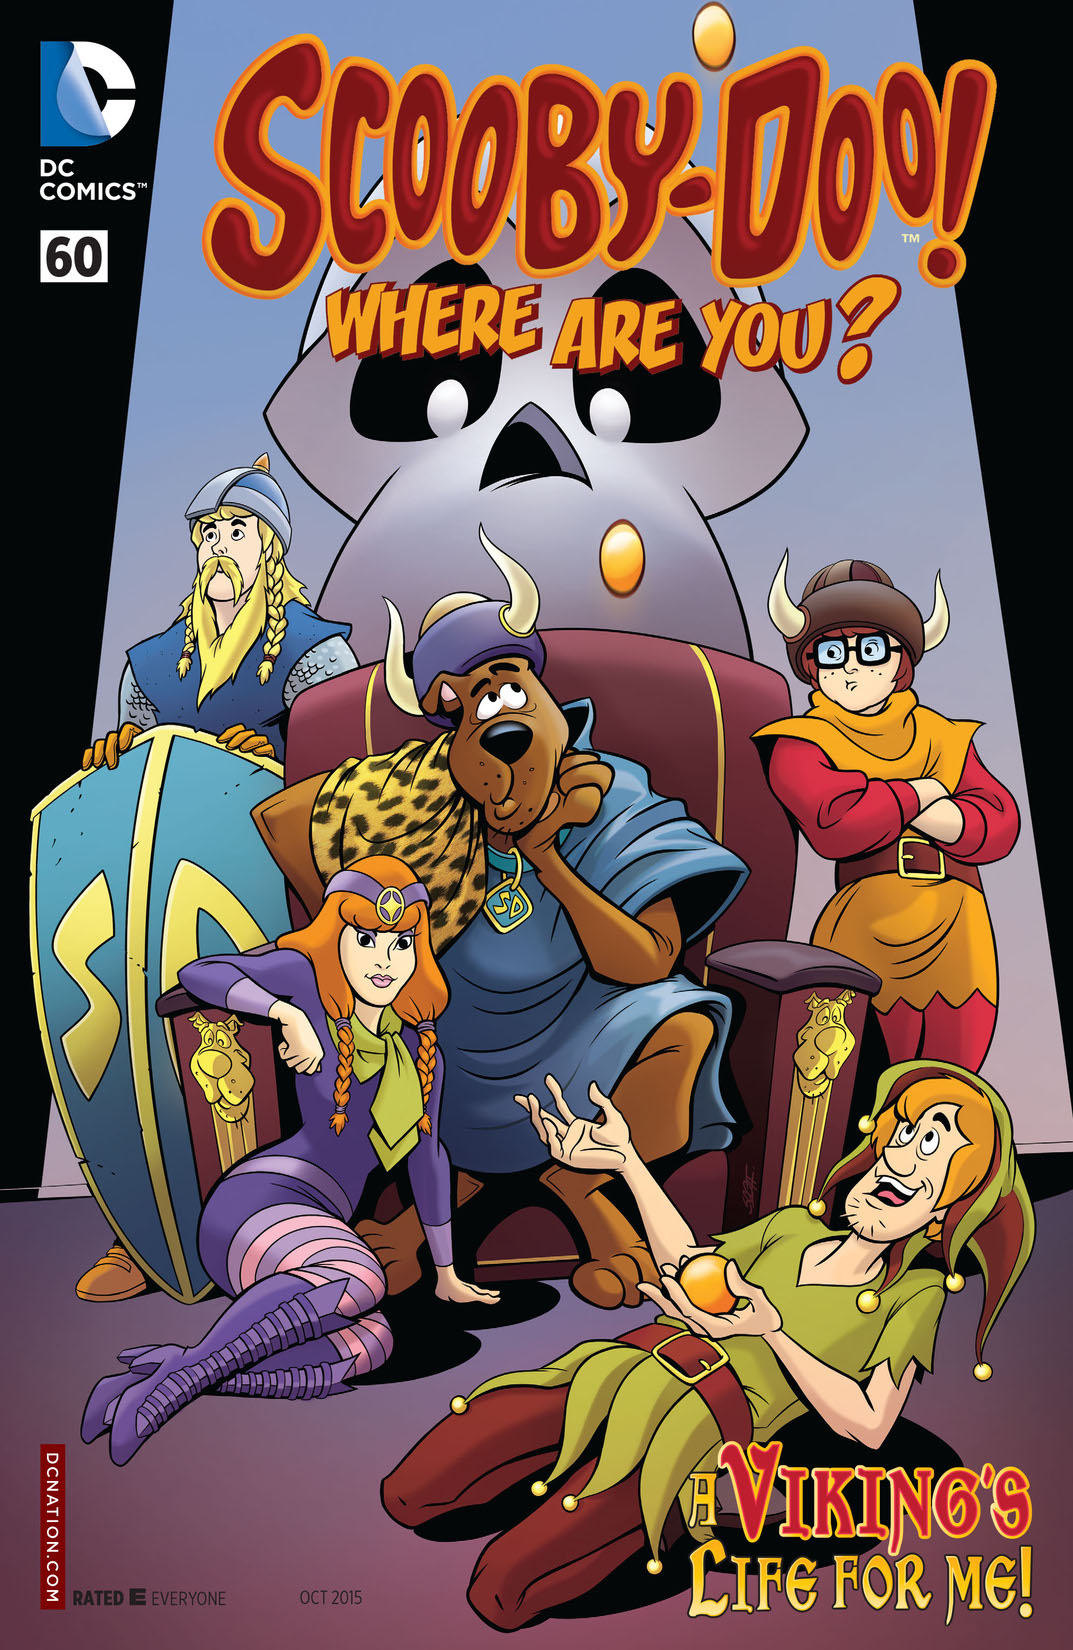 Scooby-Doo, Where Are You? #60 preview images